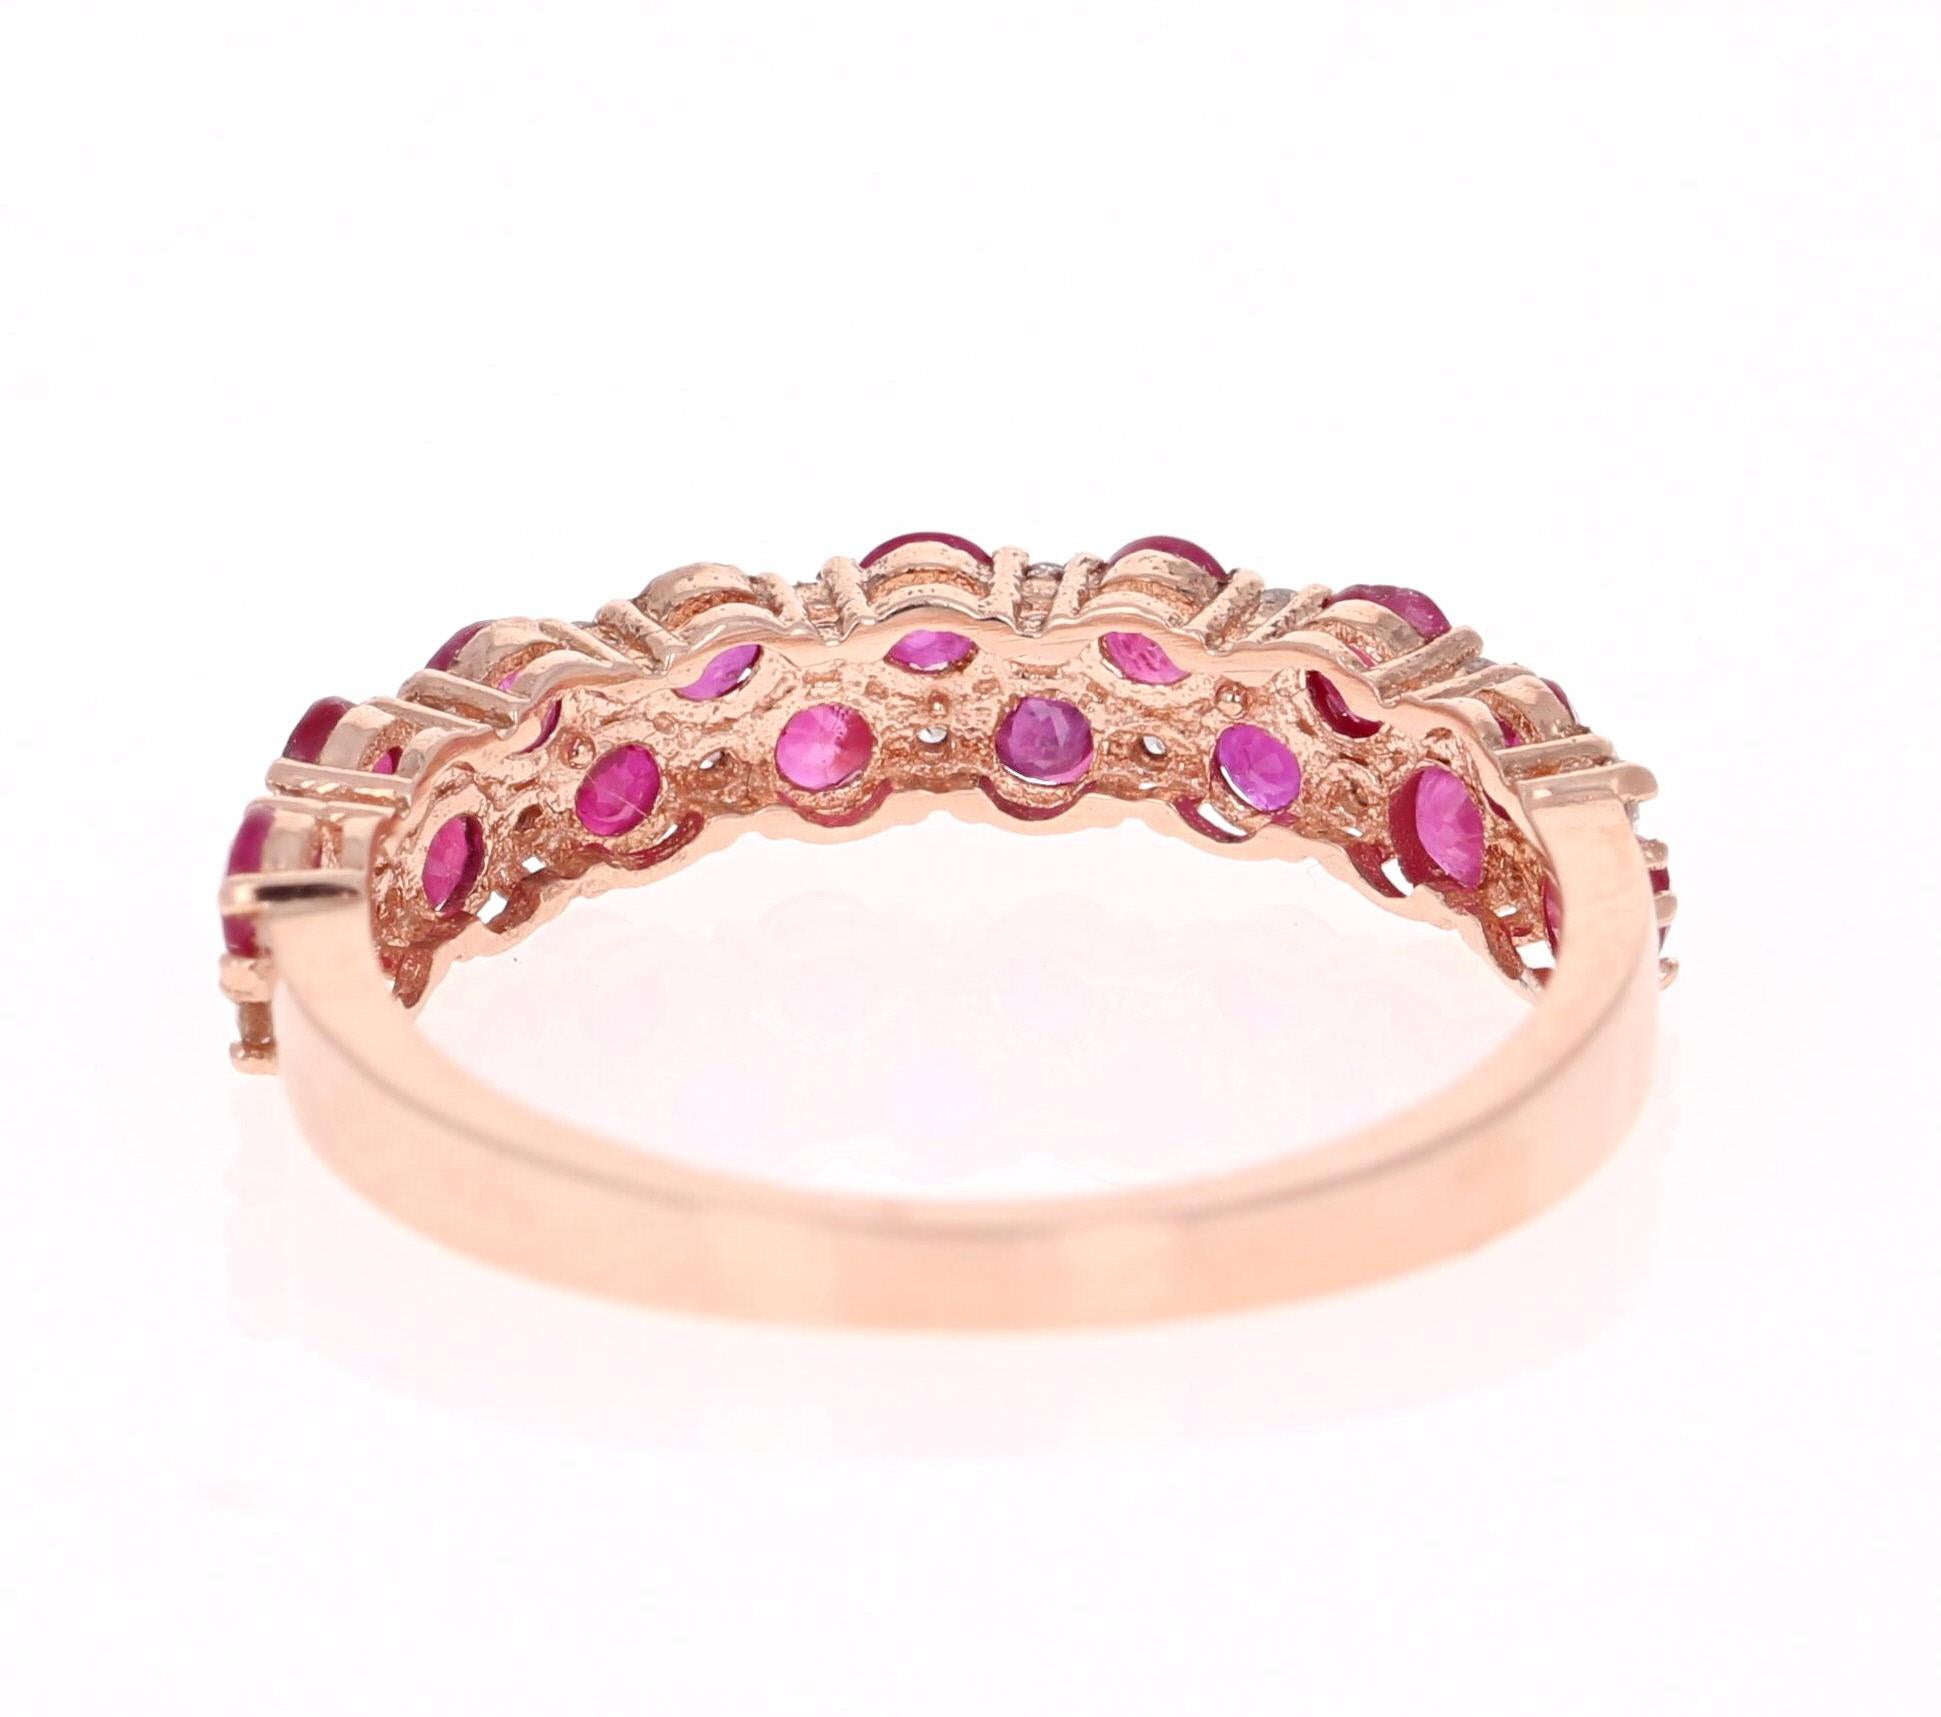 Contemporary 1.90 Carat Diamond Ruby Rose Gold Stackable Bands